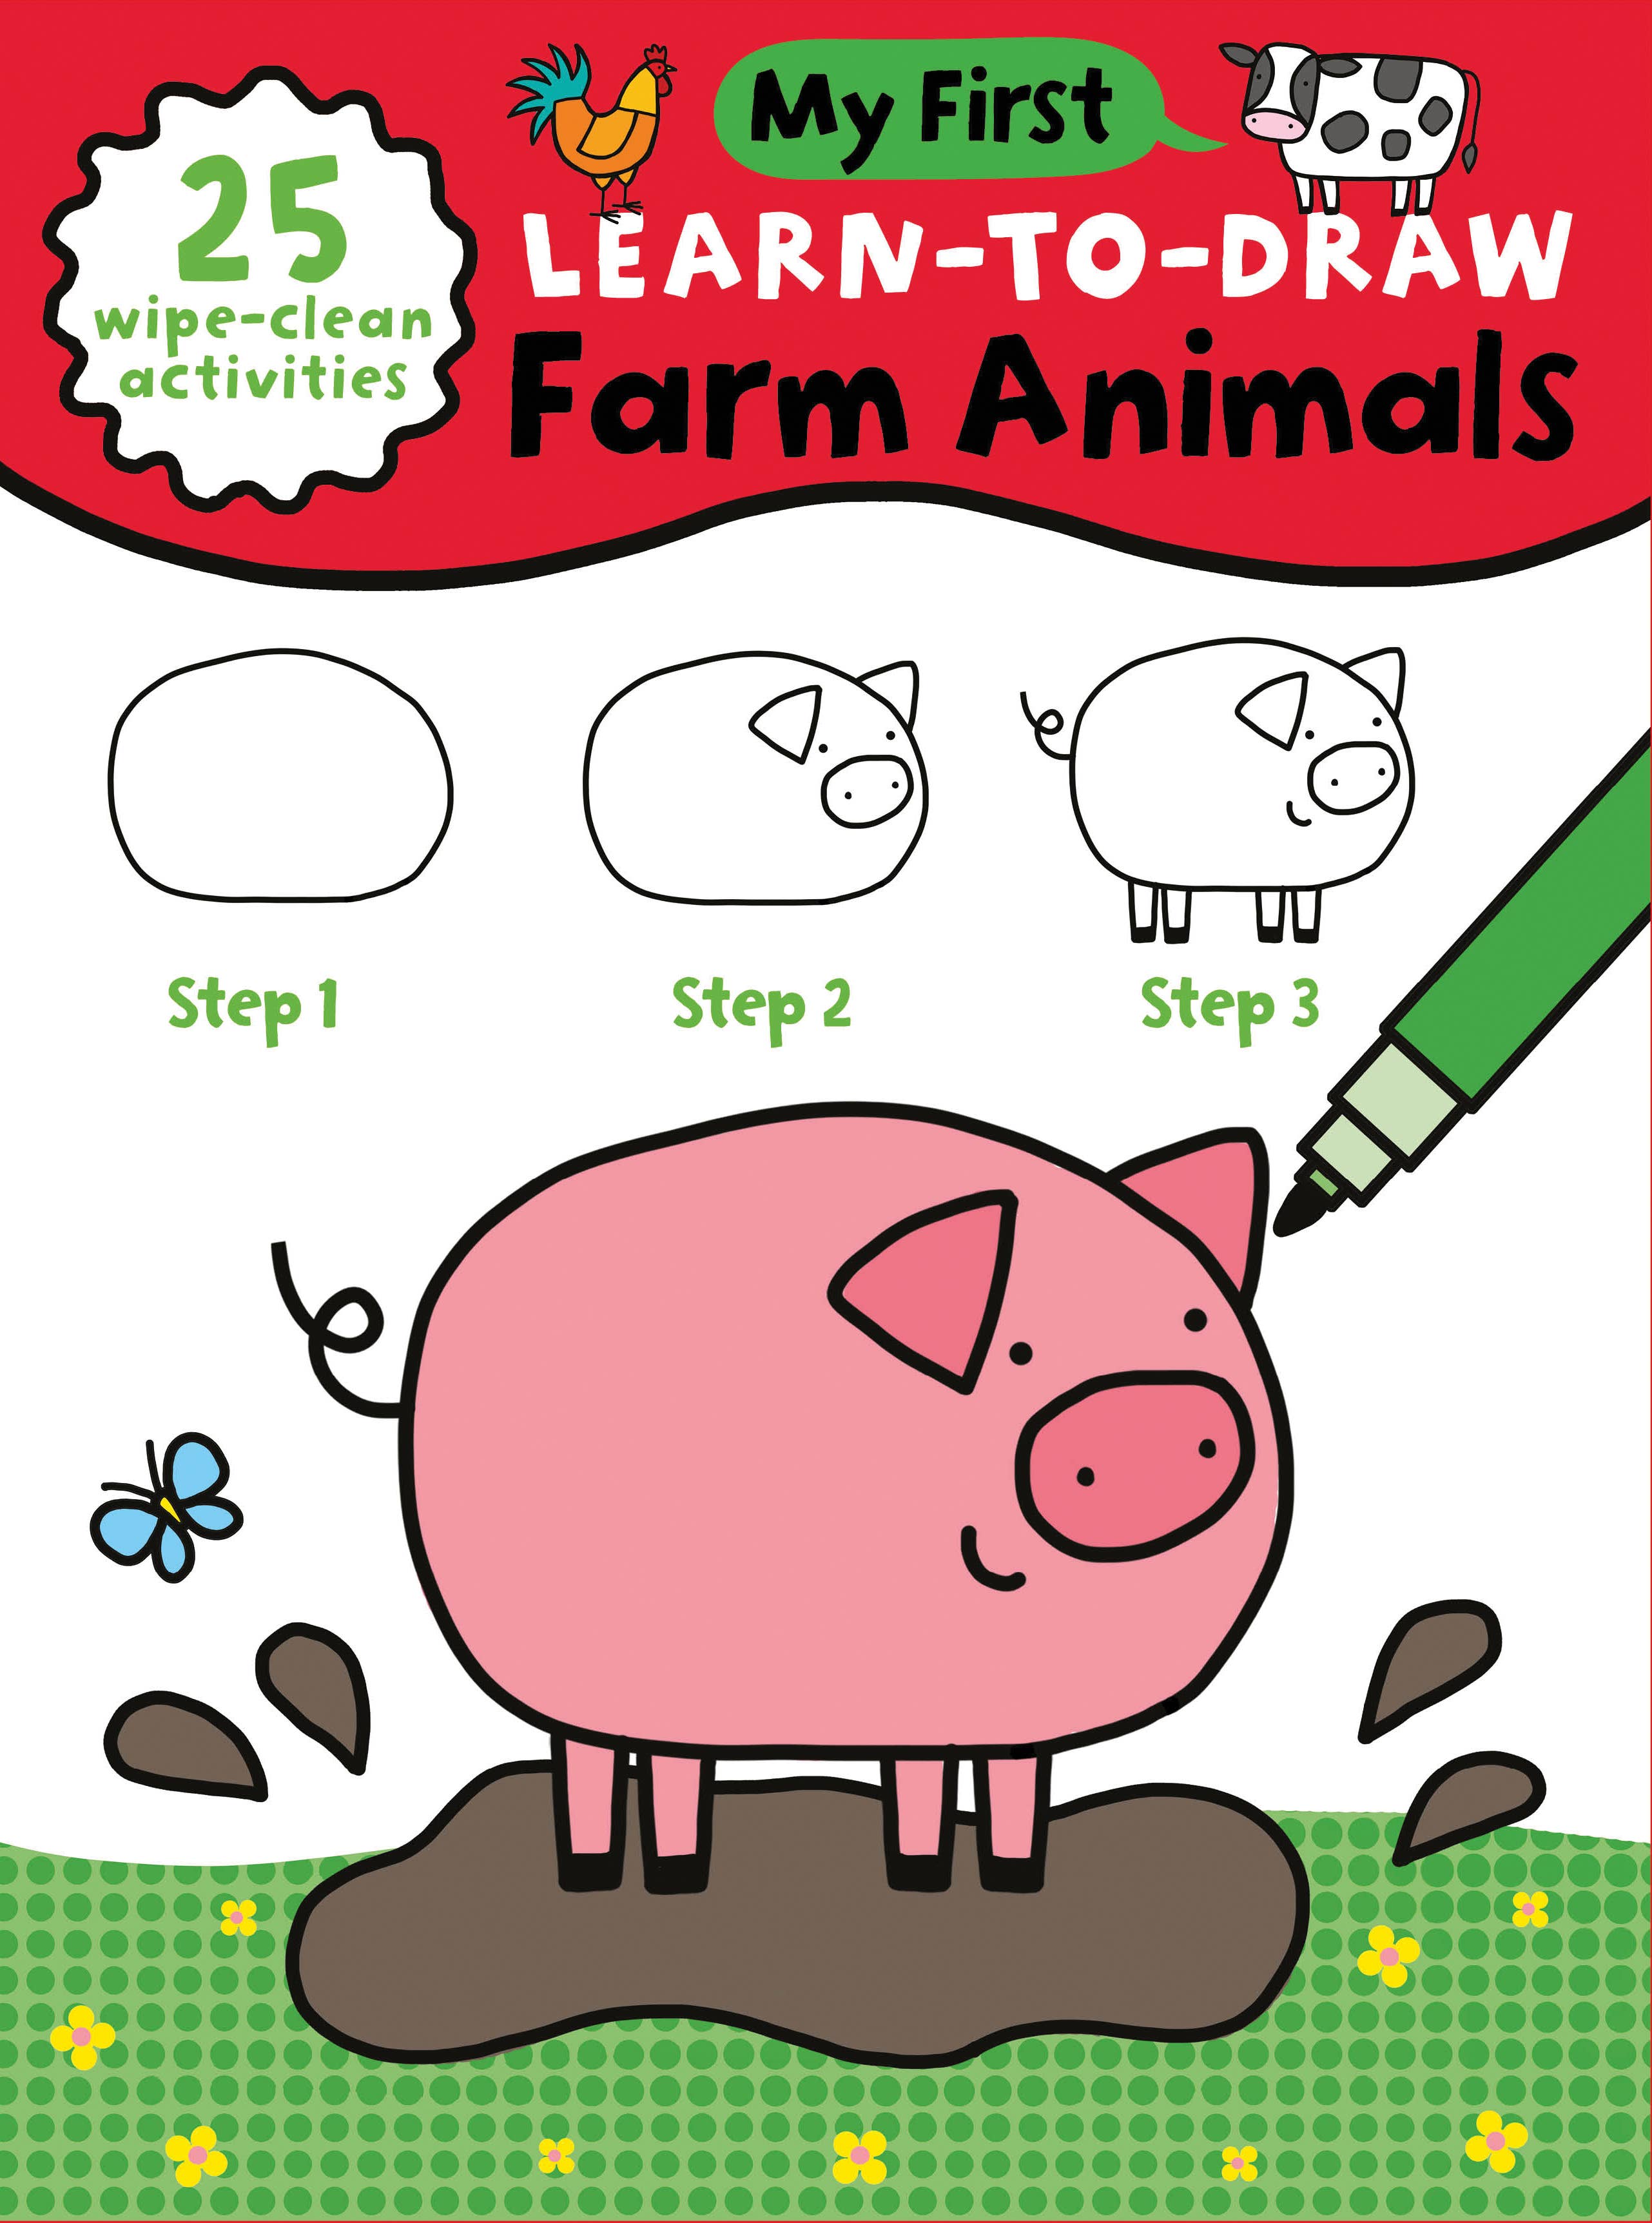 Buy Drawing and Coloring Books PEPPLAY STEP BY STEP DRAWING BOOK - CUTE FARM  ANIMAL Books for Unisex Jollee